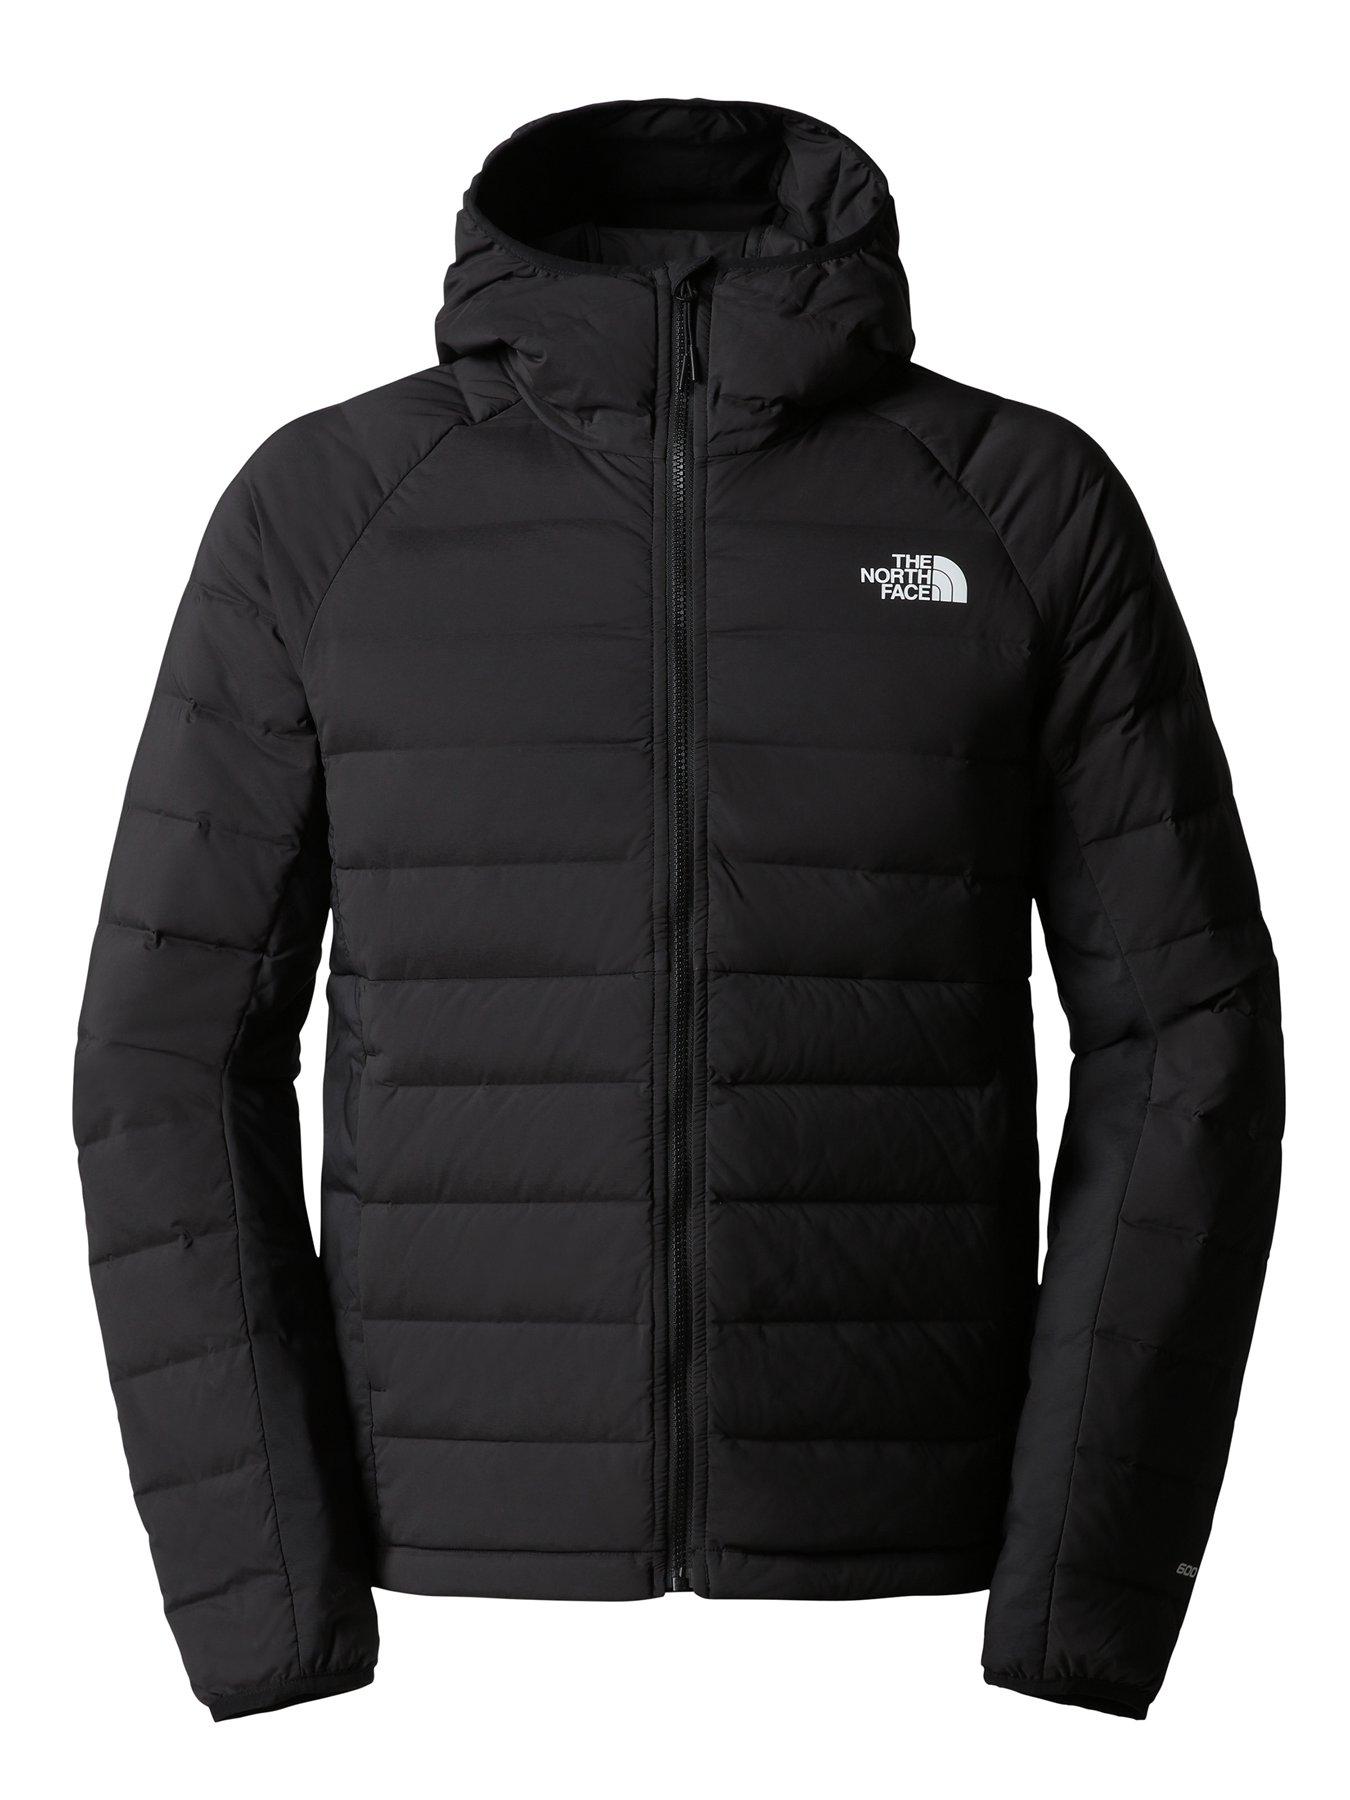 THE NORTH FACE Men's Belleview Stretch Down Hoodie - Black | very.co.uk